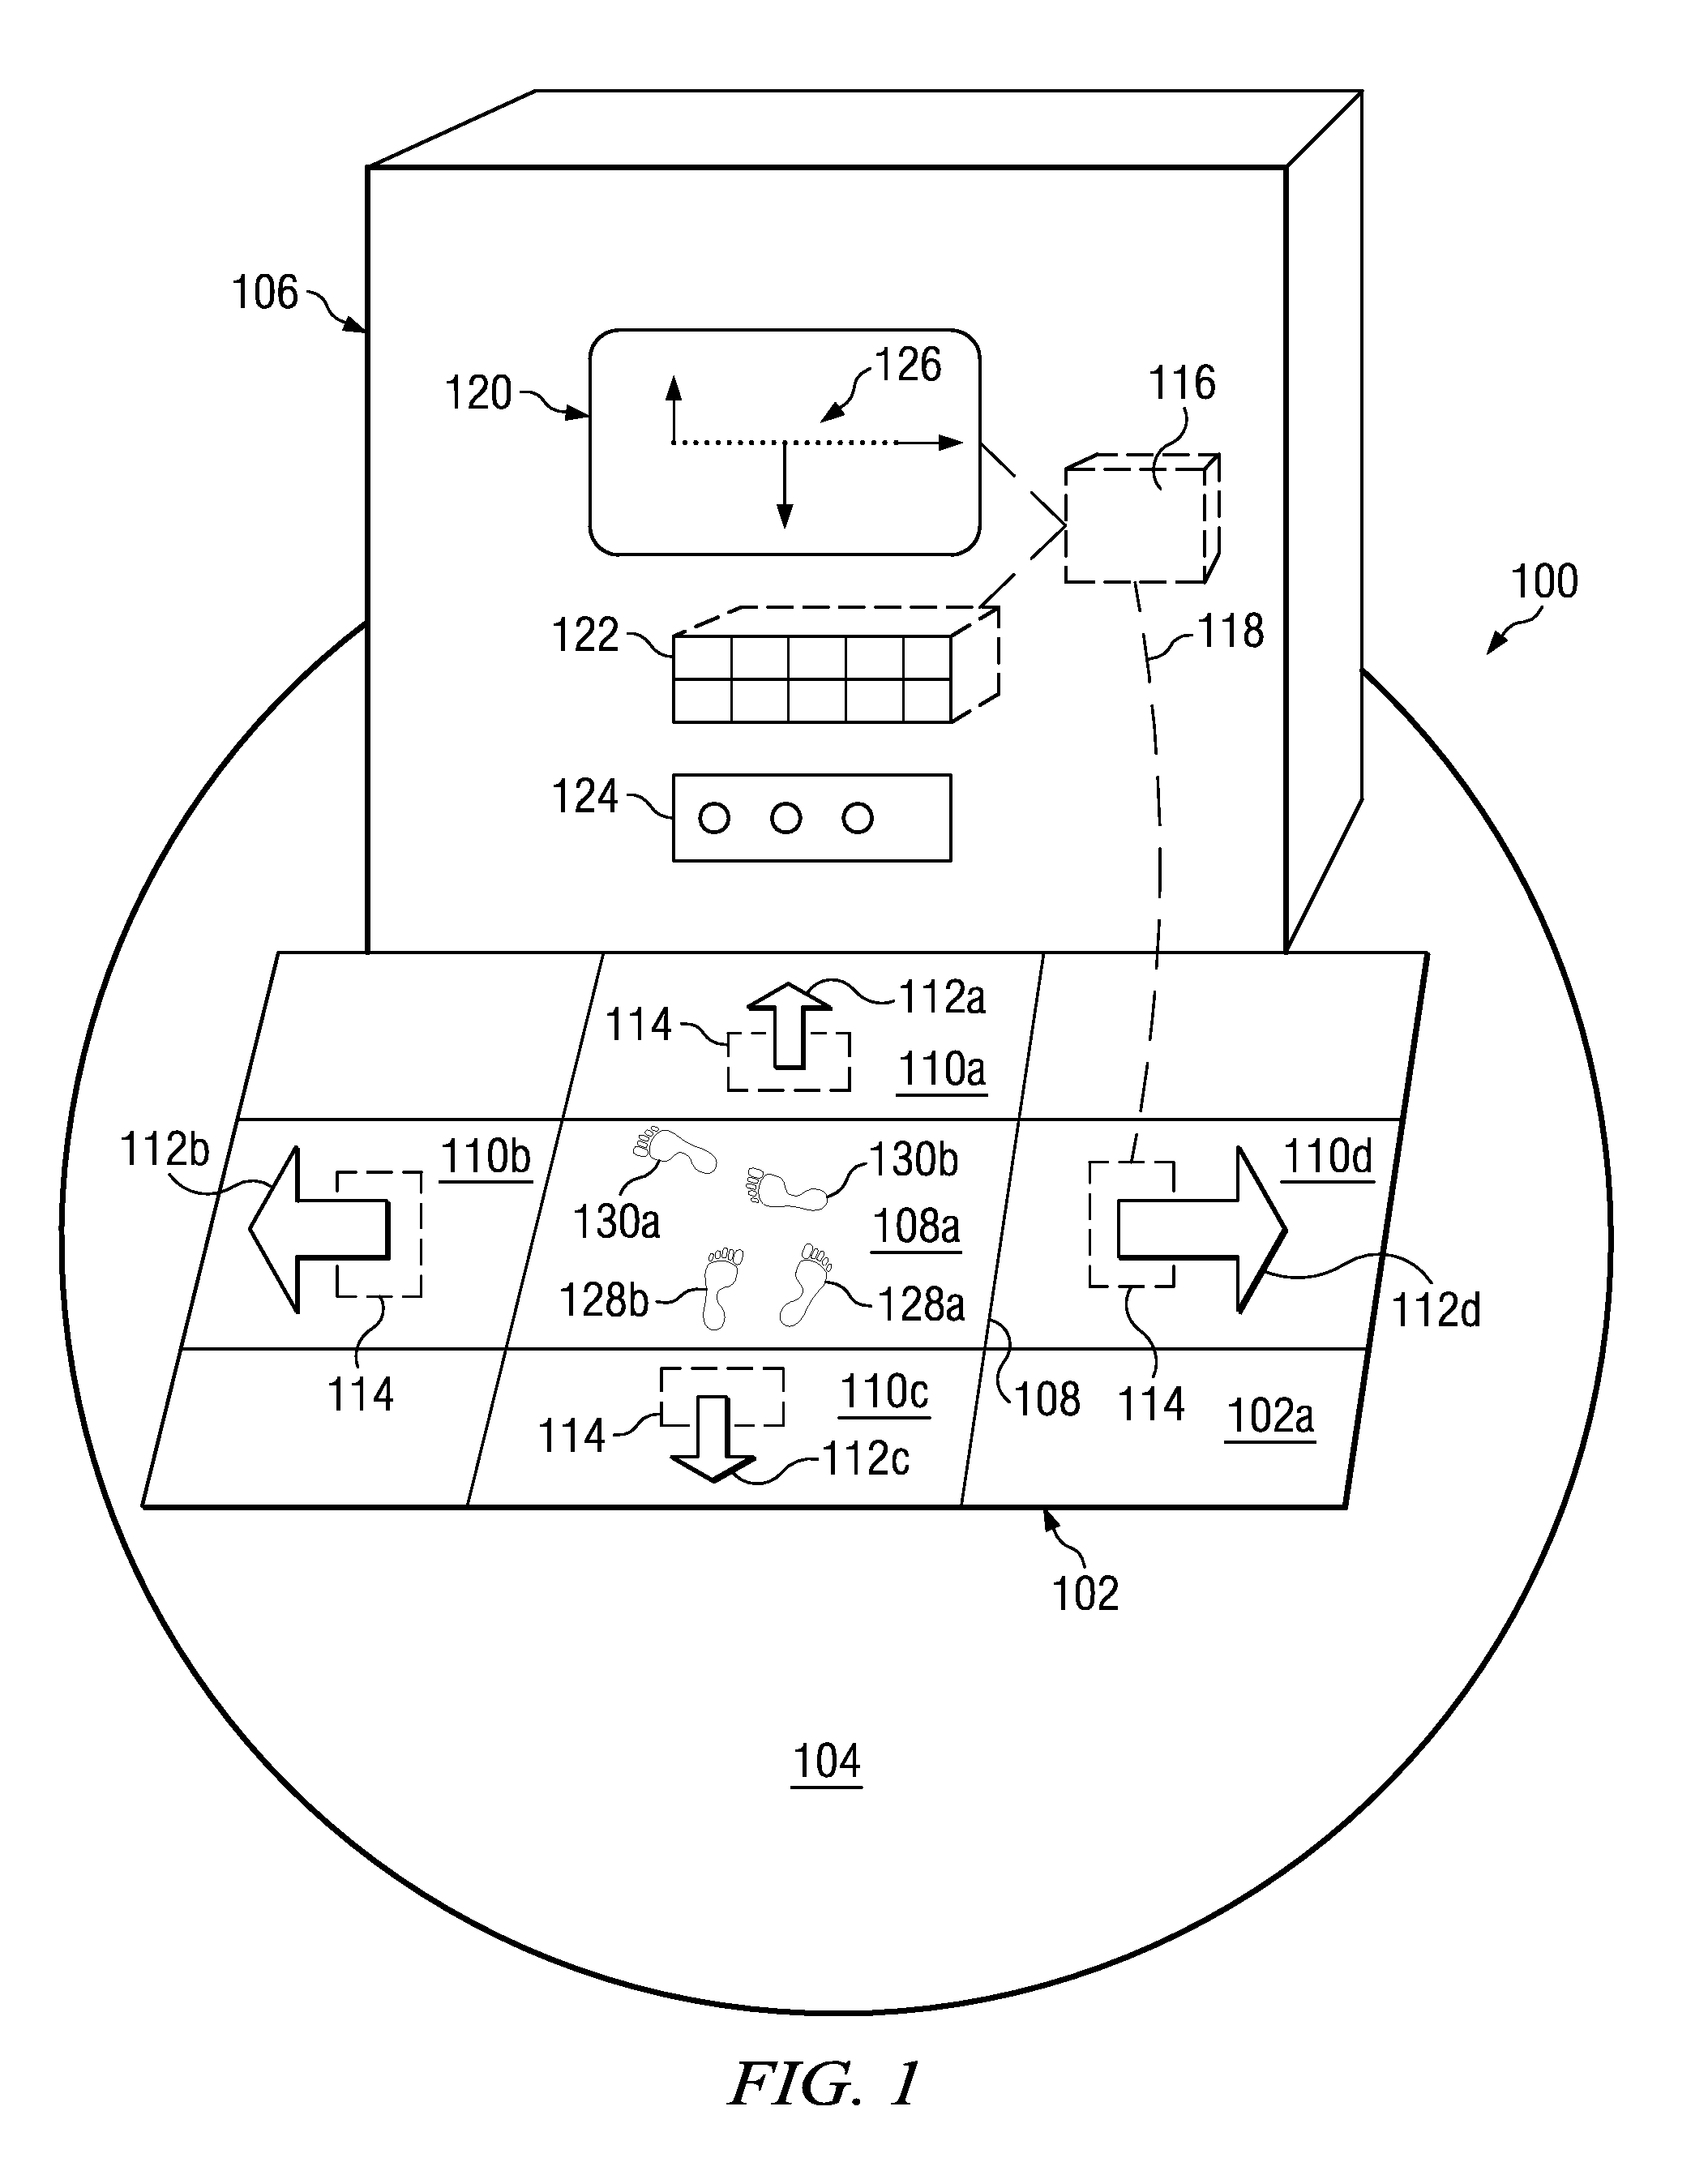 Method for automatically configuring an interactive device based on orientation of a user relative to the device